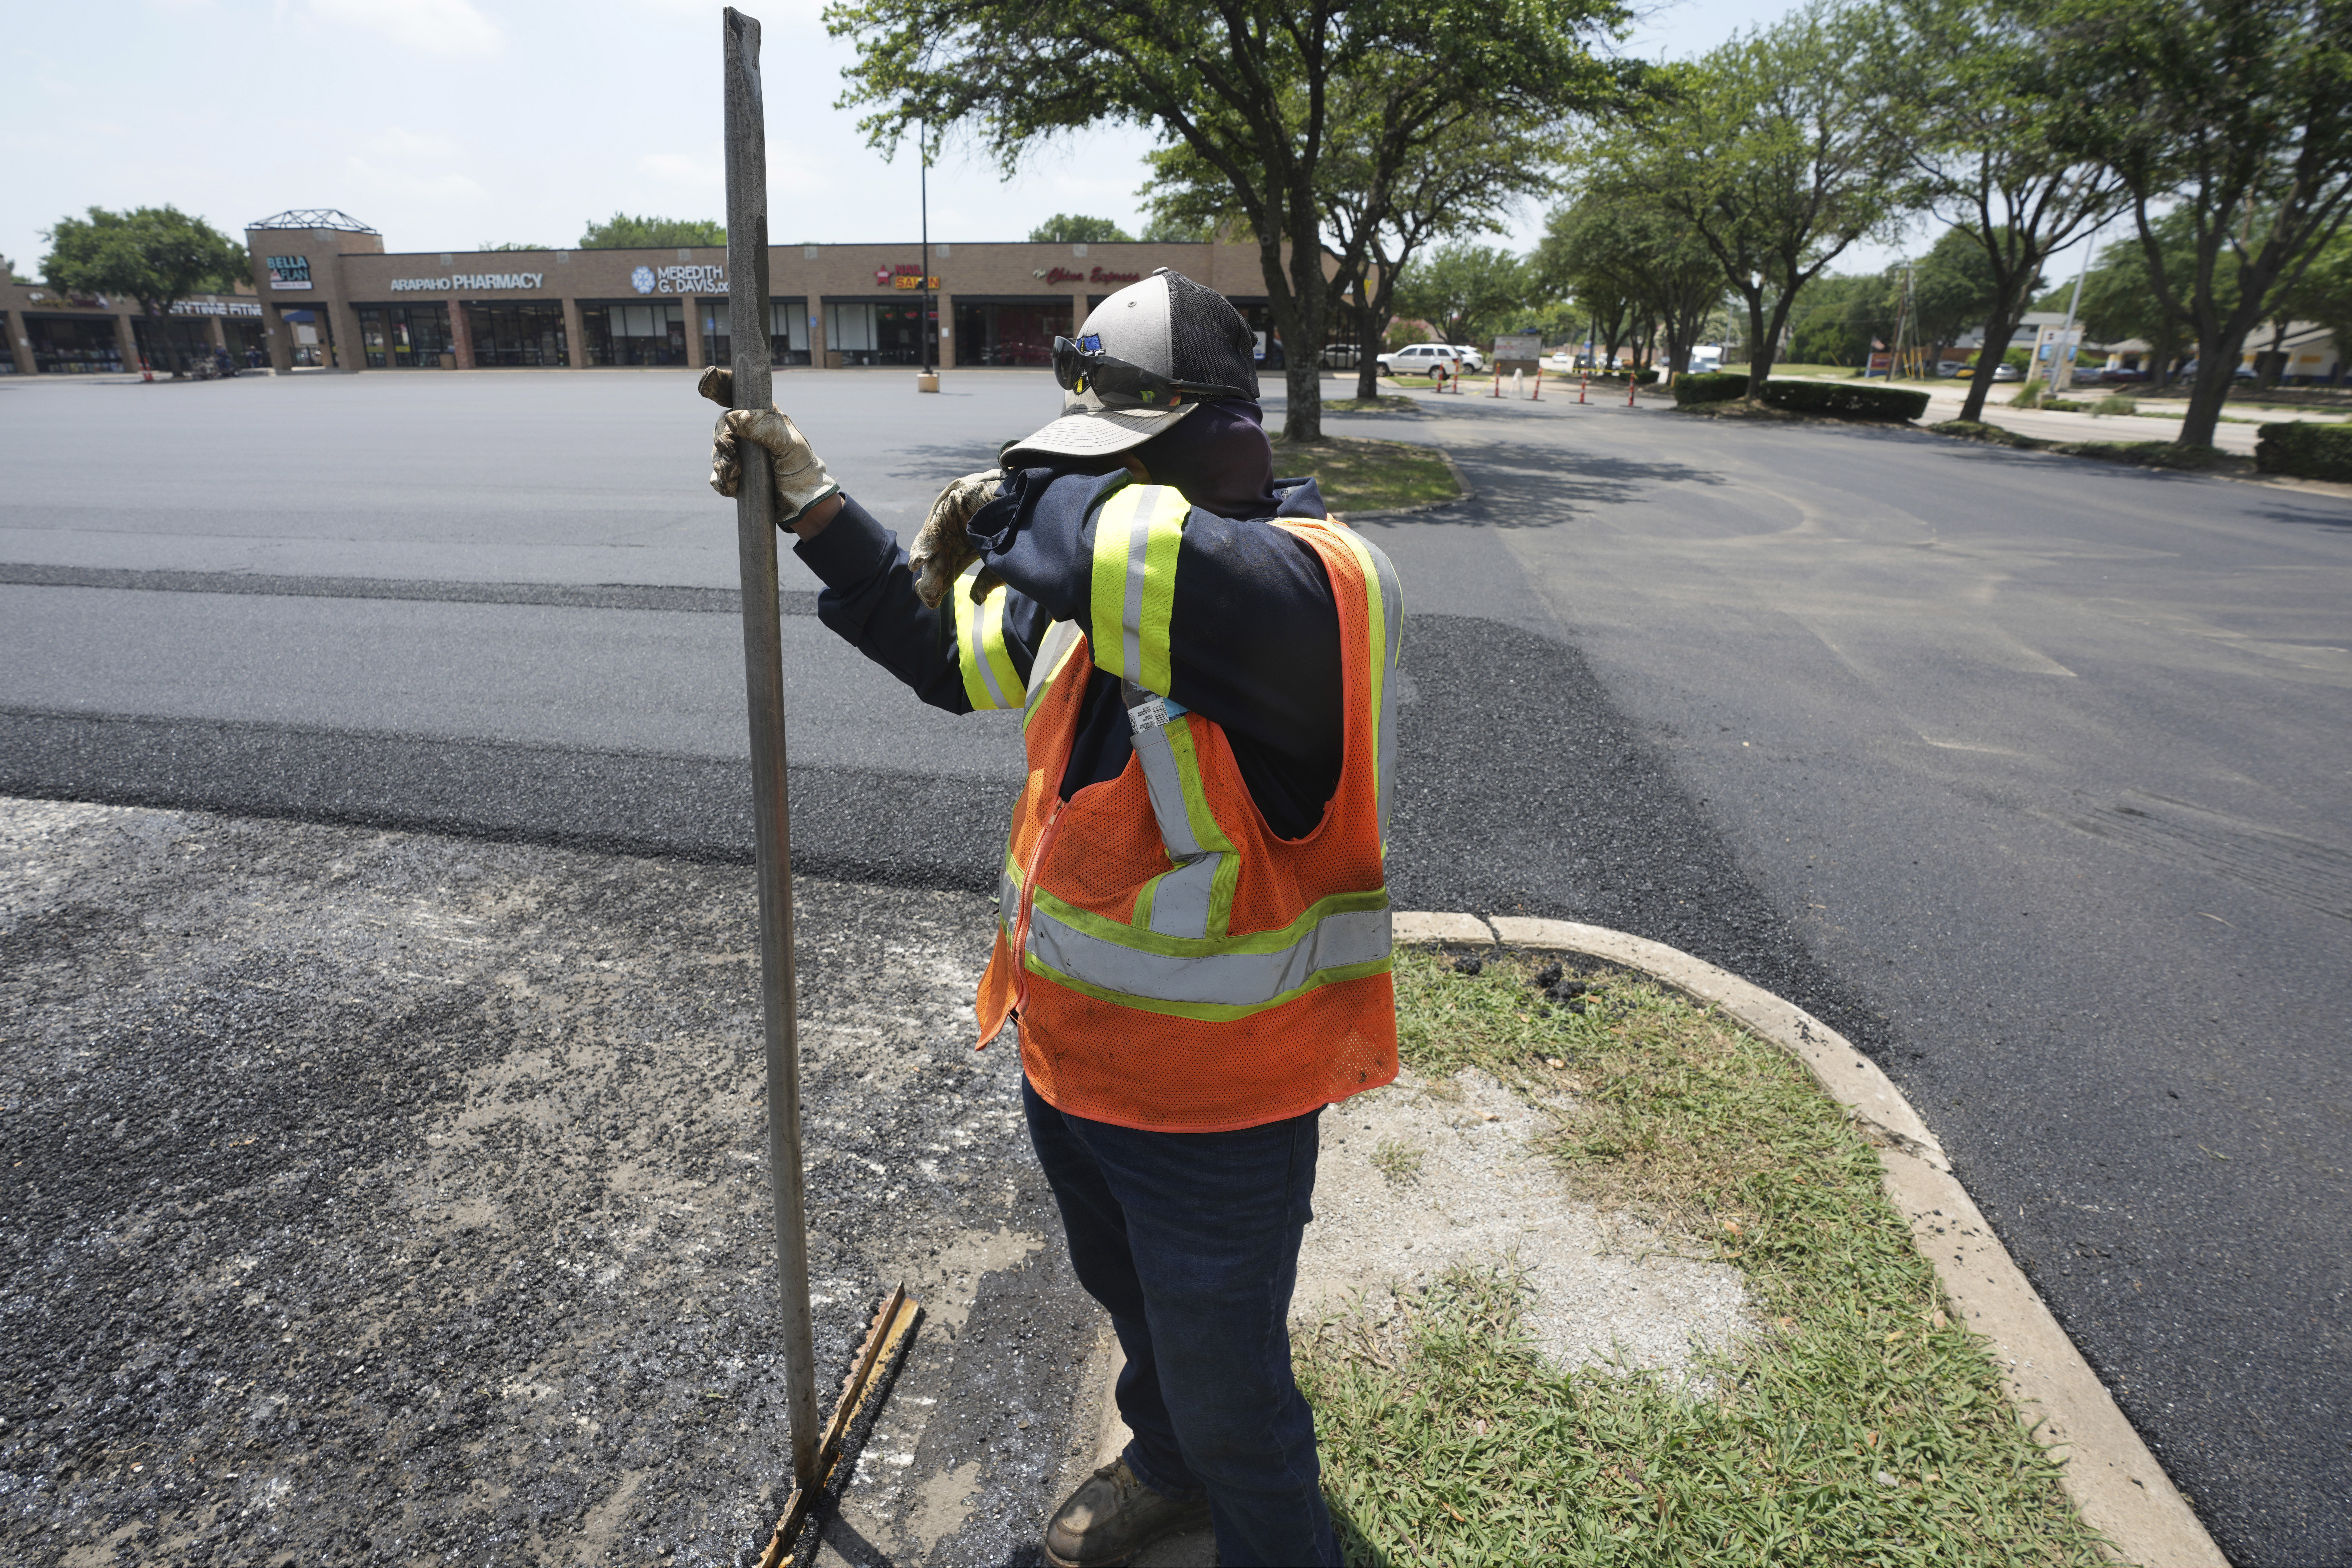 A man in a construction uniform including safety vest, pauses while shoveling asphalt in a parking lot, wiping his face with his arm to remove the excess sweat. The sun bakes down on the surface of the parking lot where he's working.